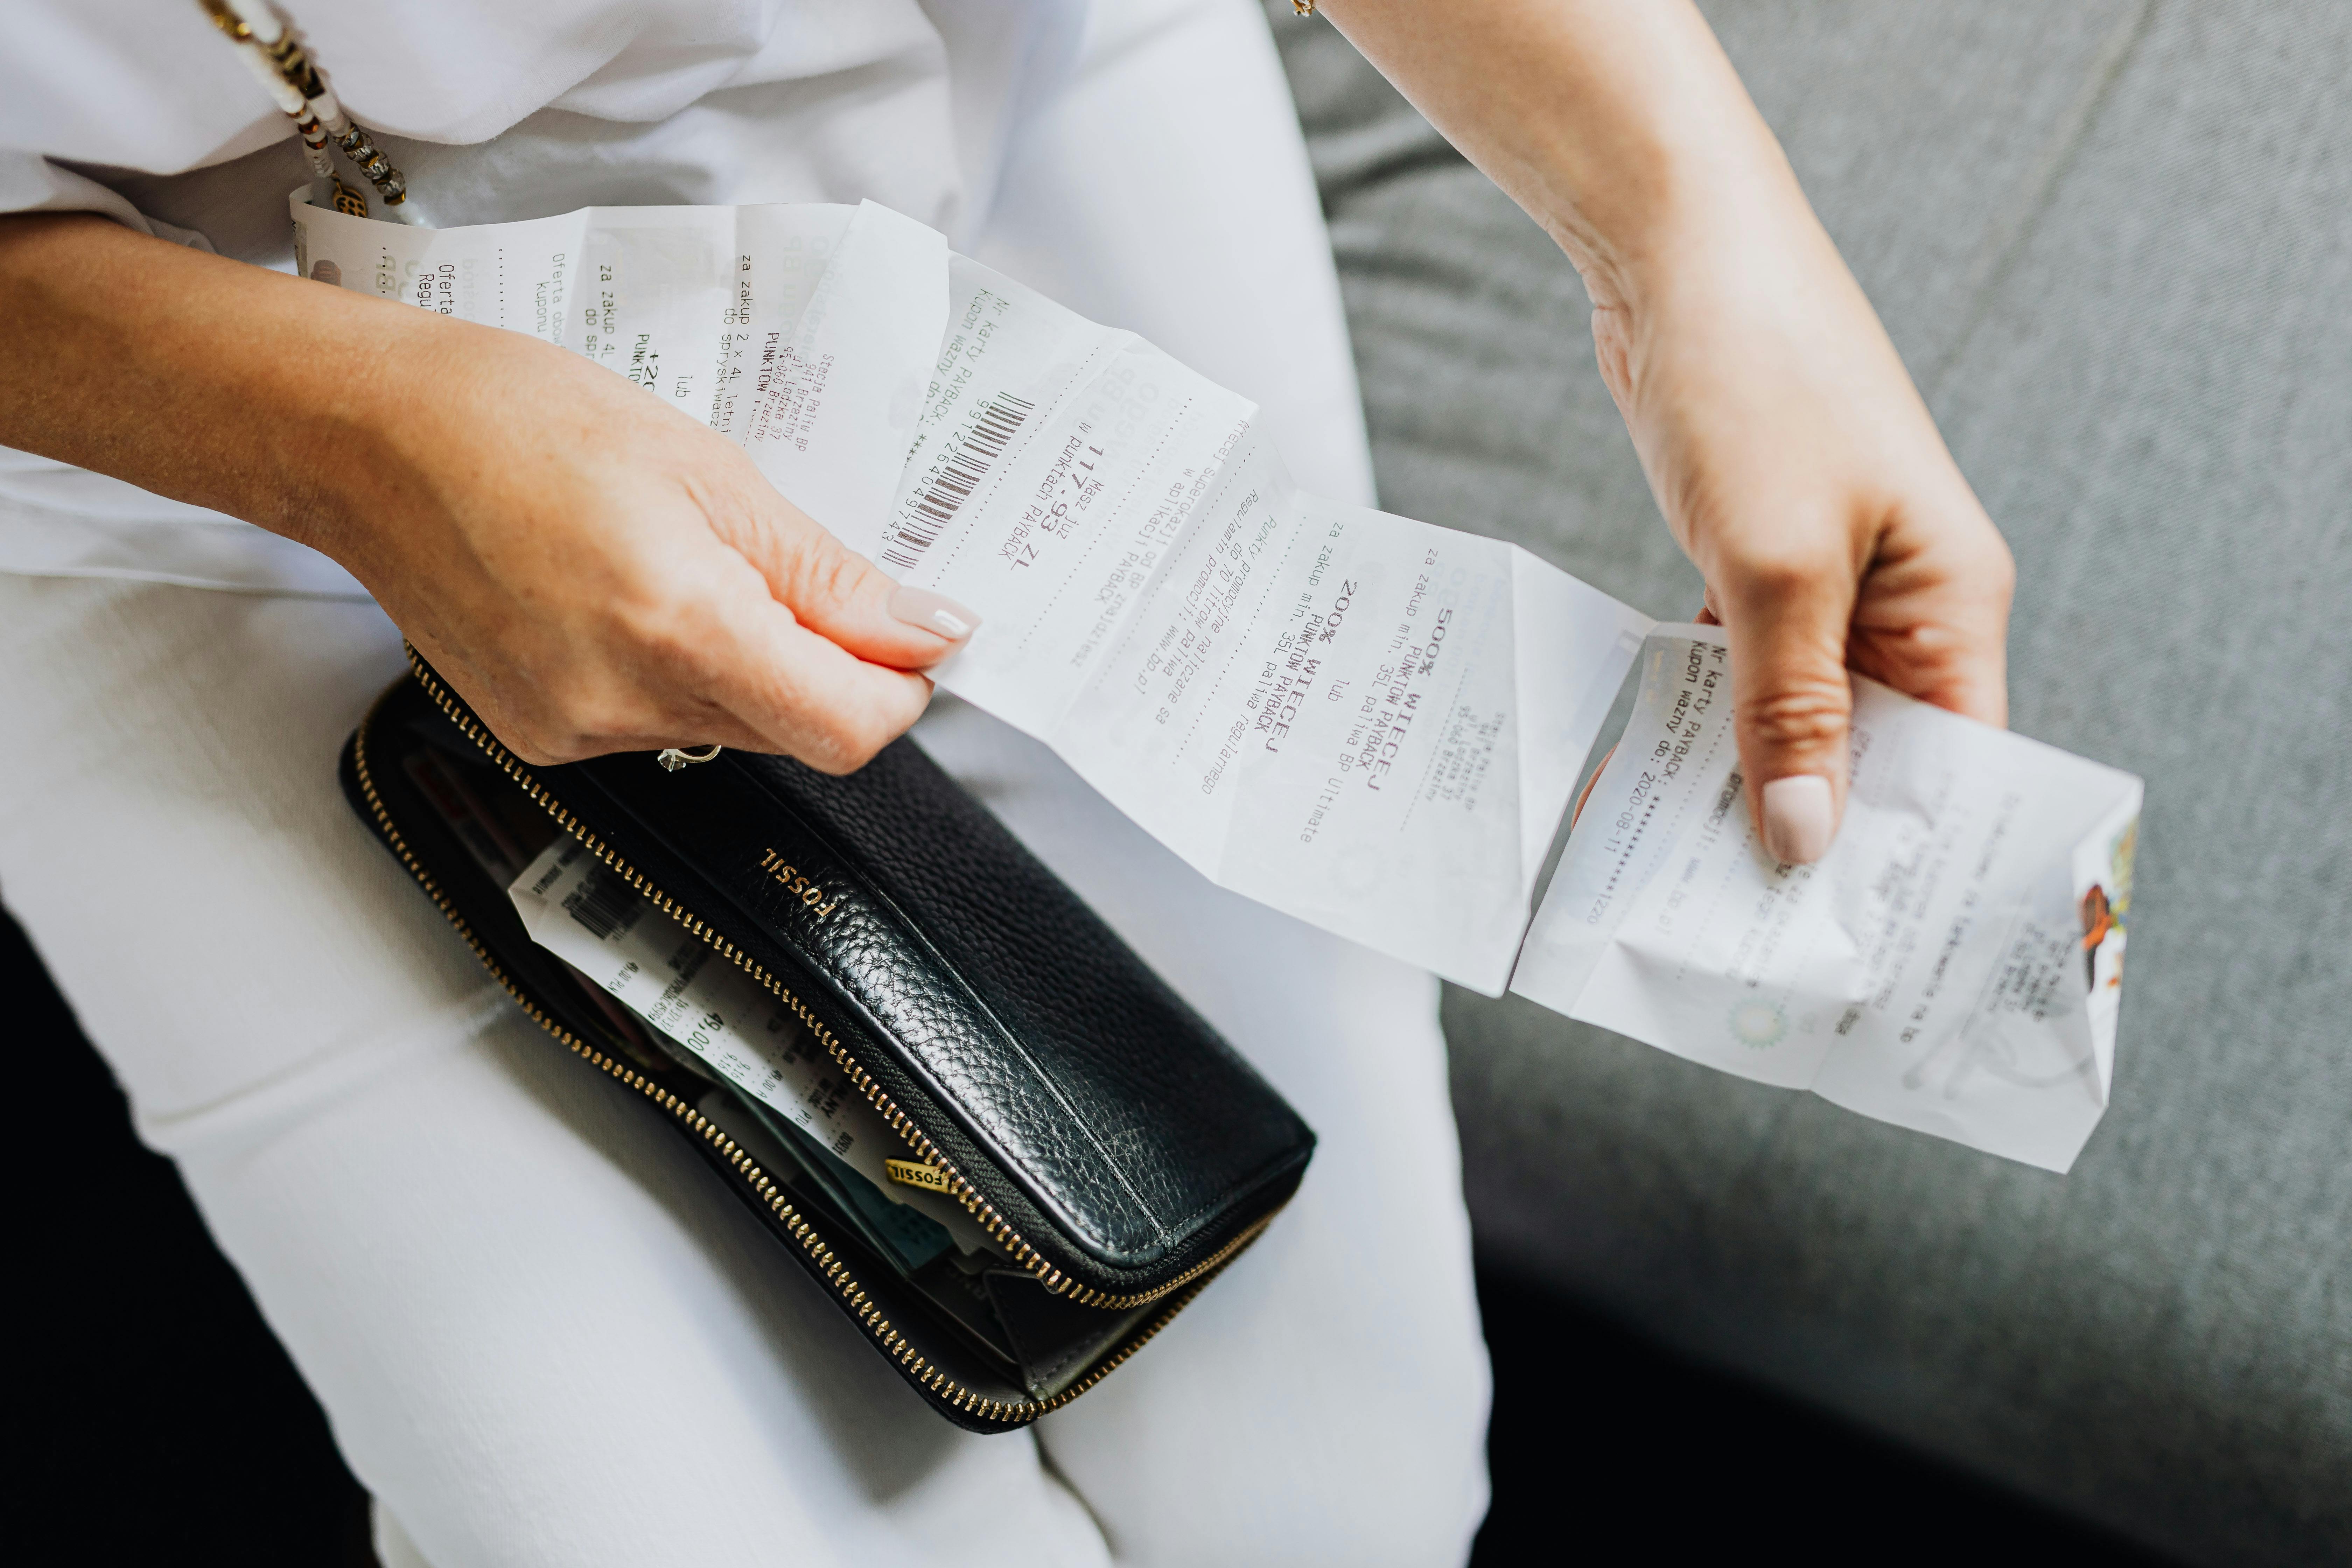 A woman sitting with receipts | Source: Pexels